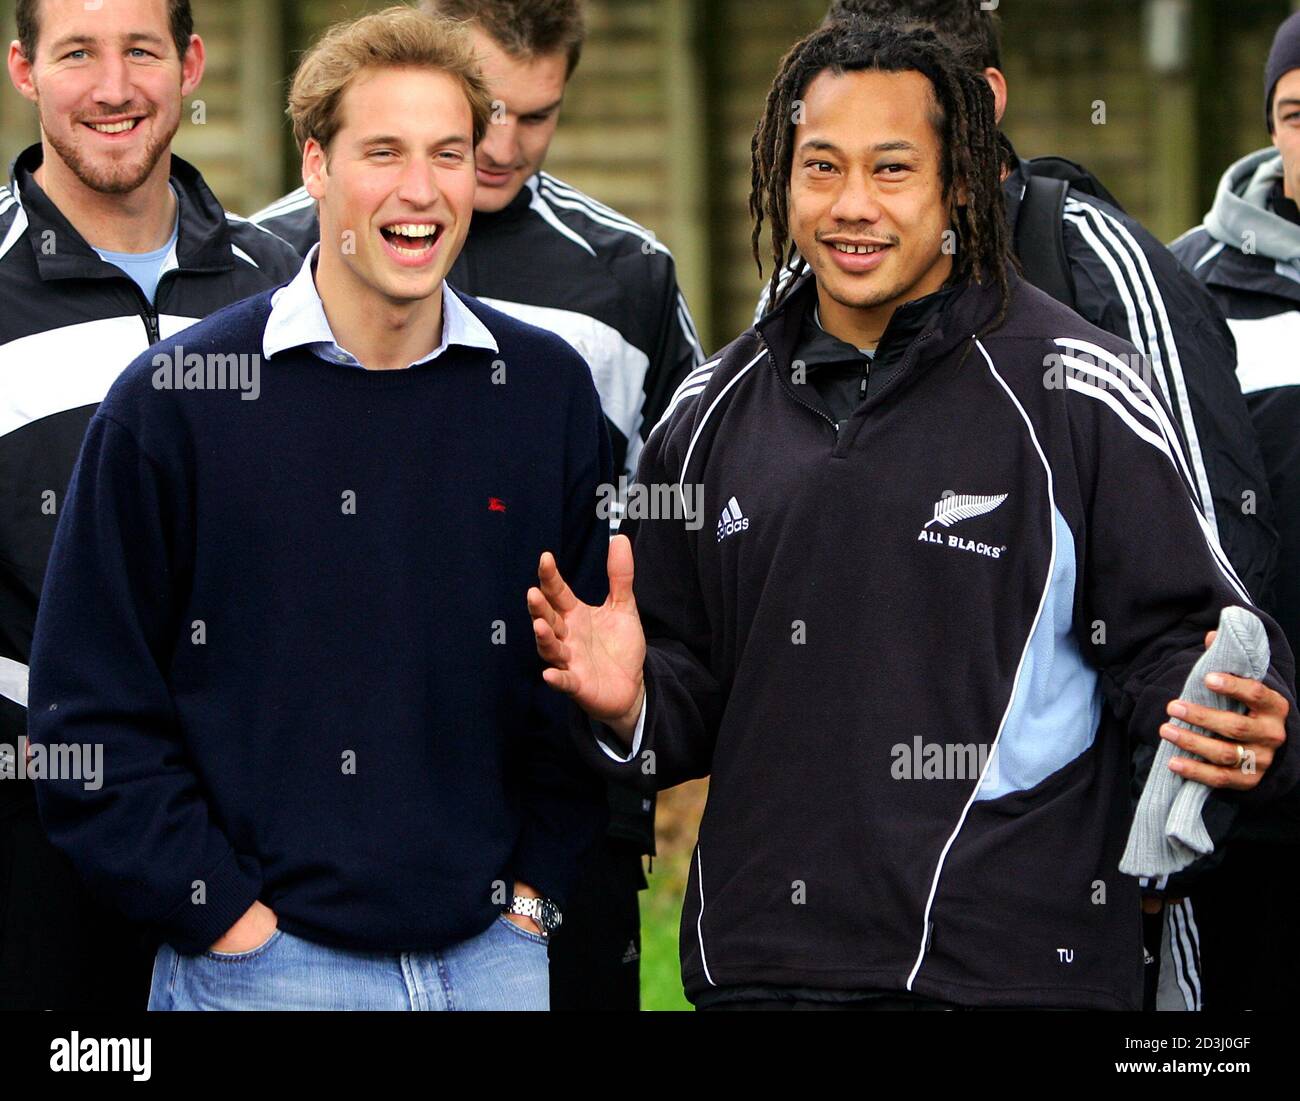 Britain's Prince William laughs with captain of the All Blacks Tana Umaga at a public training session in Auckland.  Britain's Prince William (front L) laughs with the captain of the All Blacks Tana Umaga (front R) at a public training session in Auckland July 4, 2005. Prince William, who graduated recently from Scotland's St Andrews University, met the All Black team two days after they defeated the British and Irish Lions in Wellington and took an unbeatable 2-0 lead in the best-of-three test series. Prince William is also performing official duties during his ten-day tour of New Zealand, hi Banque D'Images